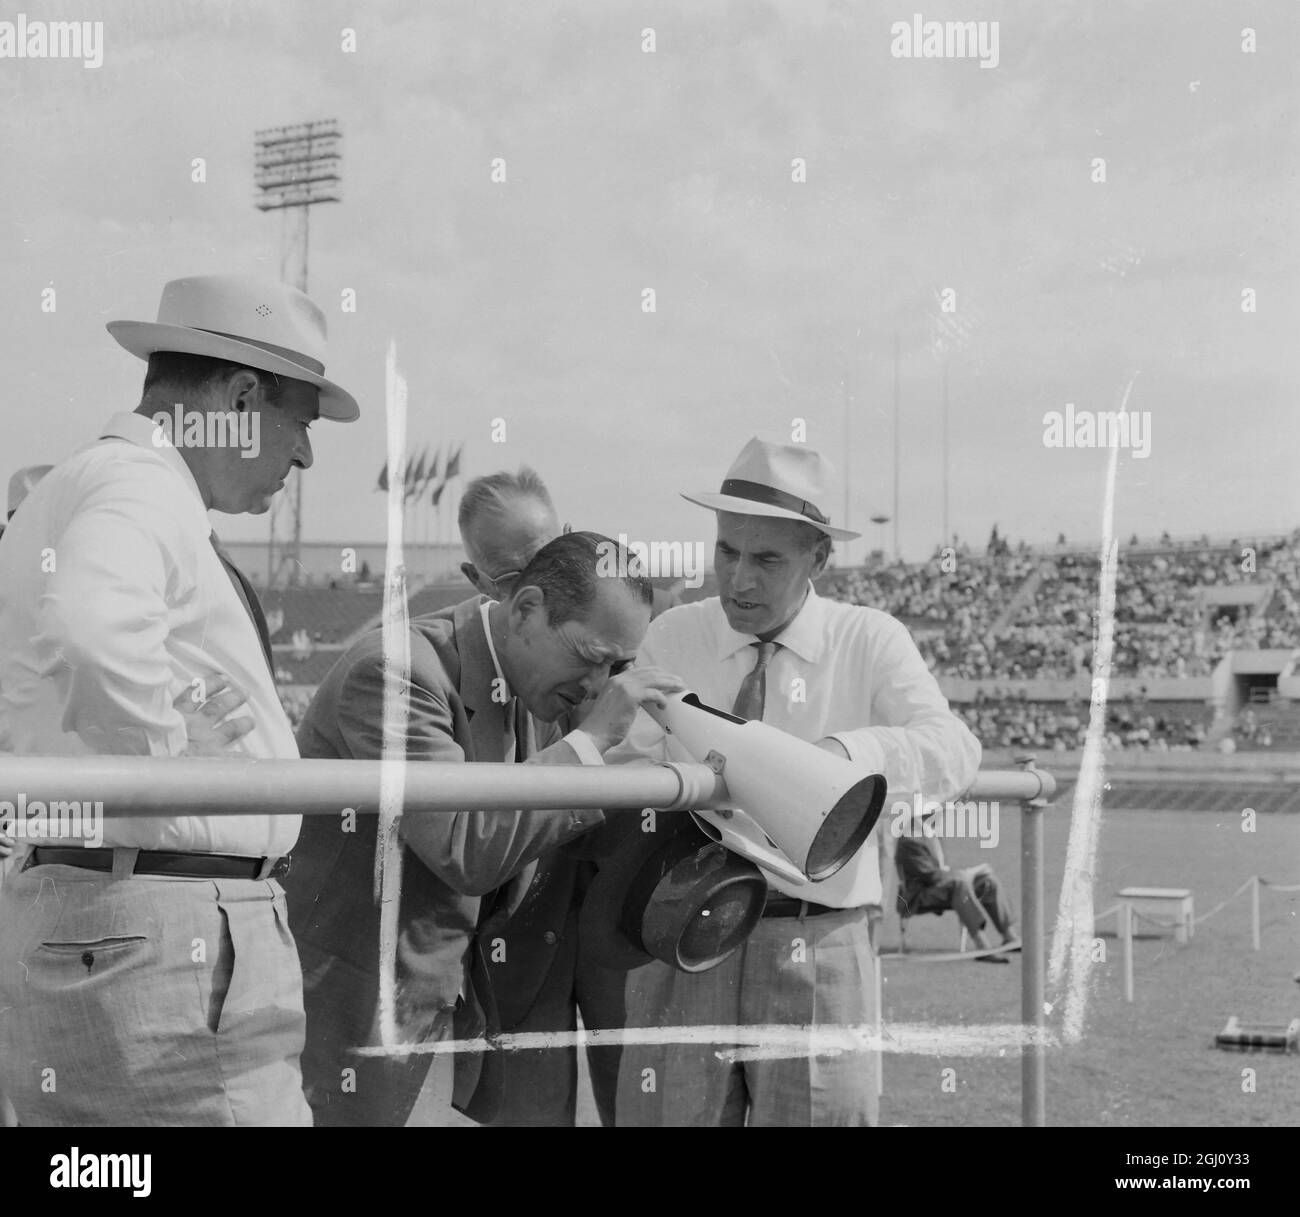 OLYMPIC GAME JAPANESE DELEGATION OFFICIAL ASANO ORGANIZER OLYMPIC GAMES IN TOKIO IN 1964 5 SEPTEMBER 1960 Stock Photo